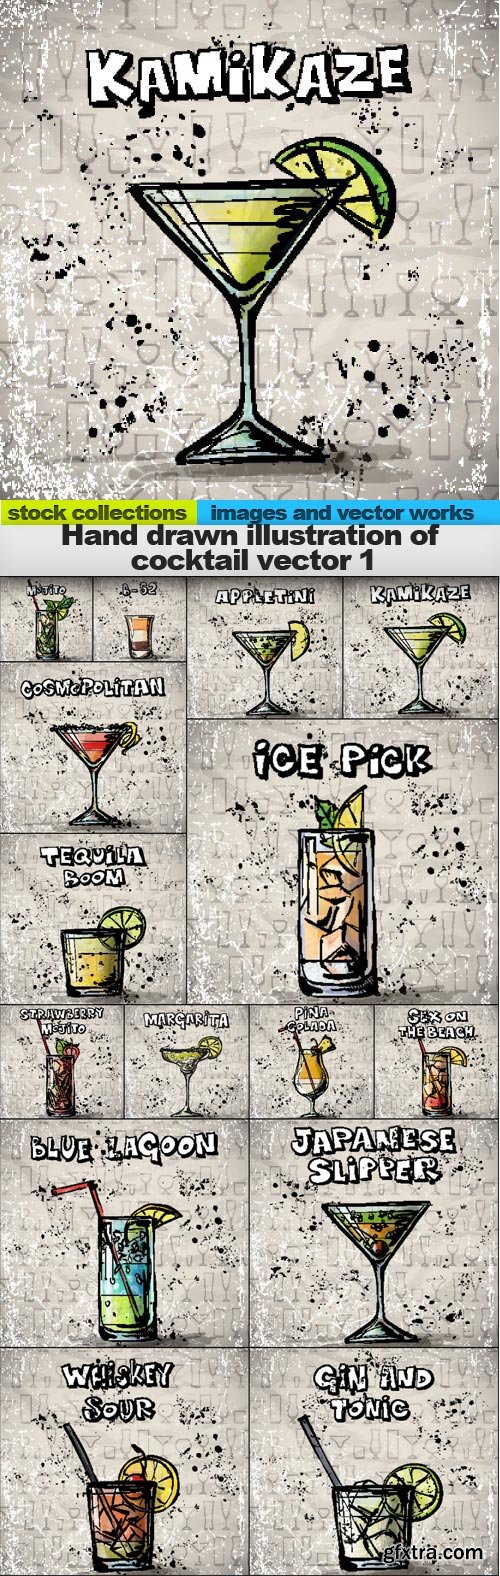 Hand drawn illustration of cocktail vector 1, 15 x EPS